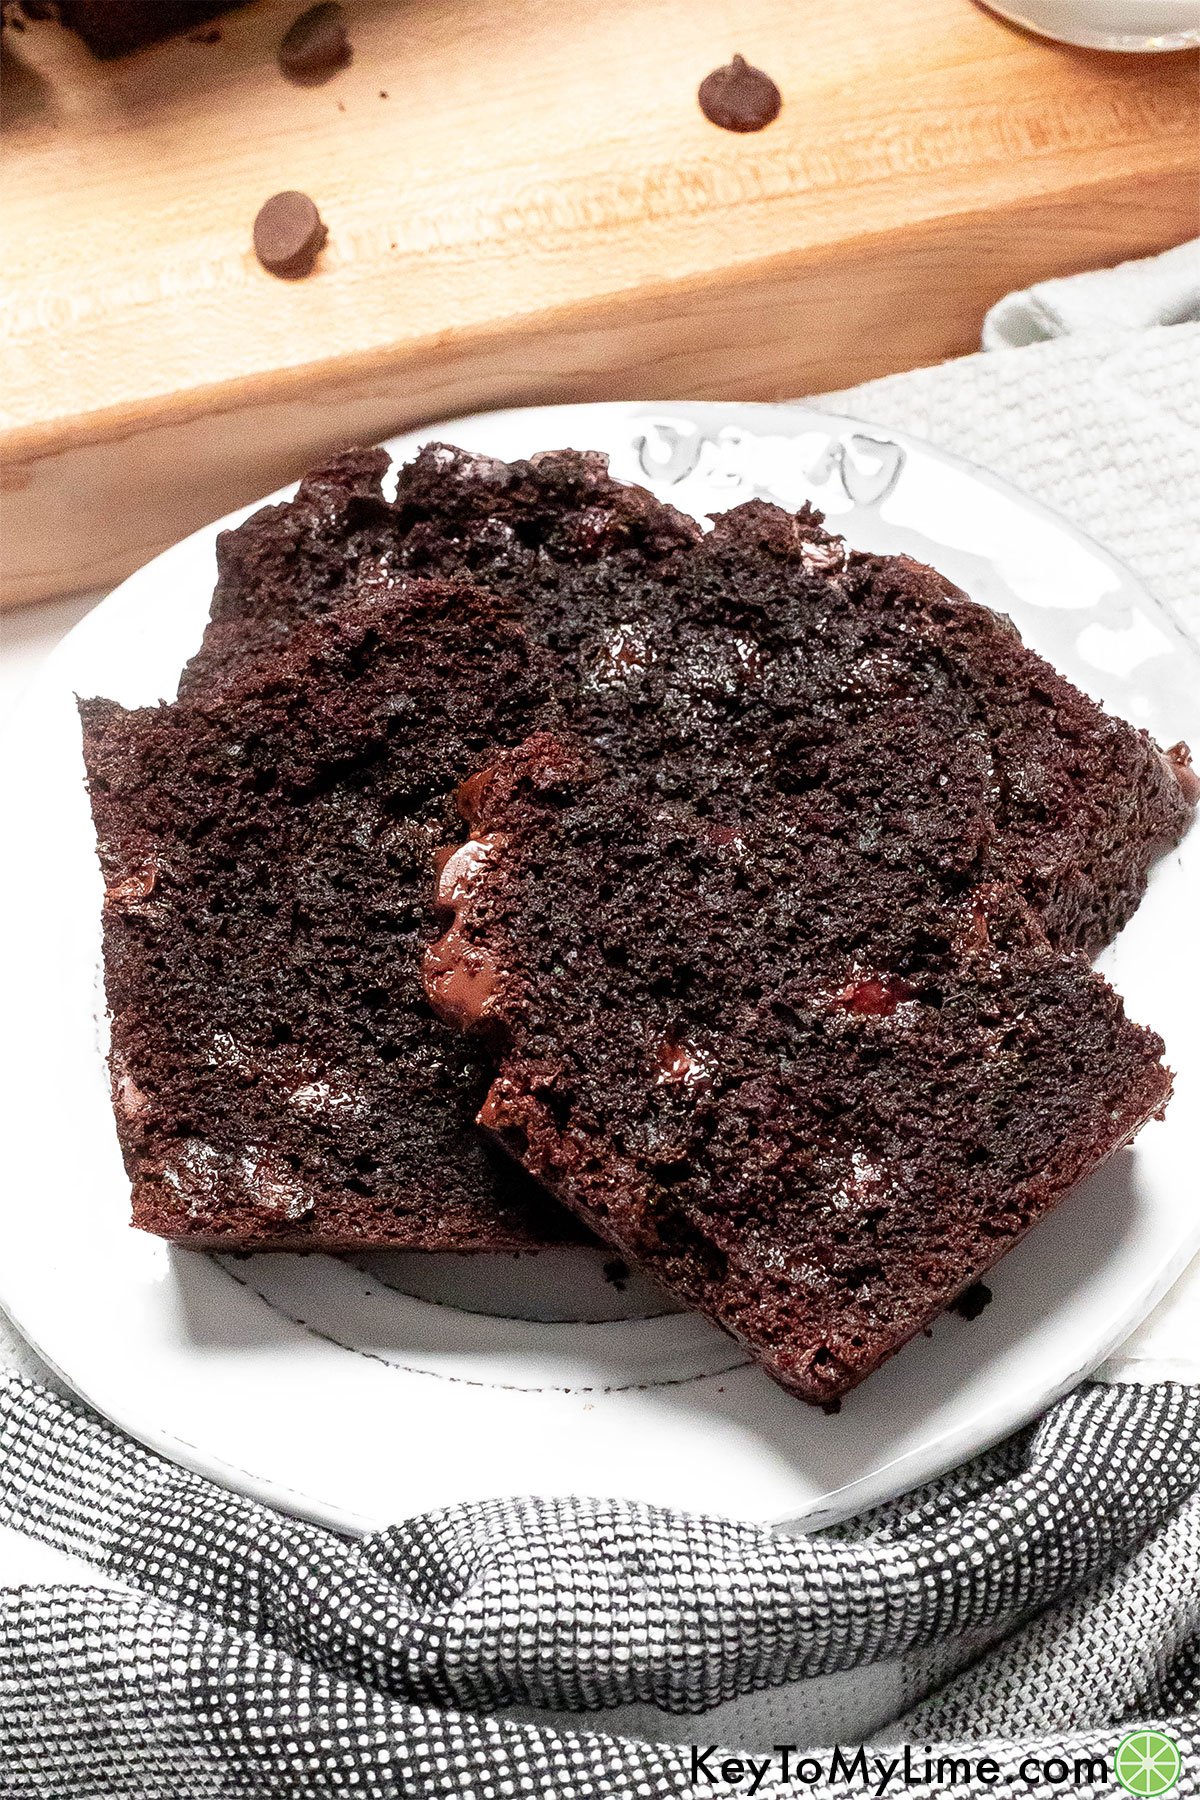 Slices of moist and rich chocolate bread on a white plate.